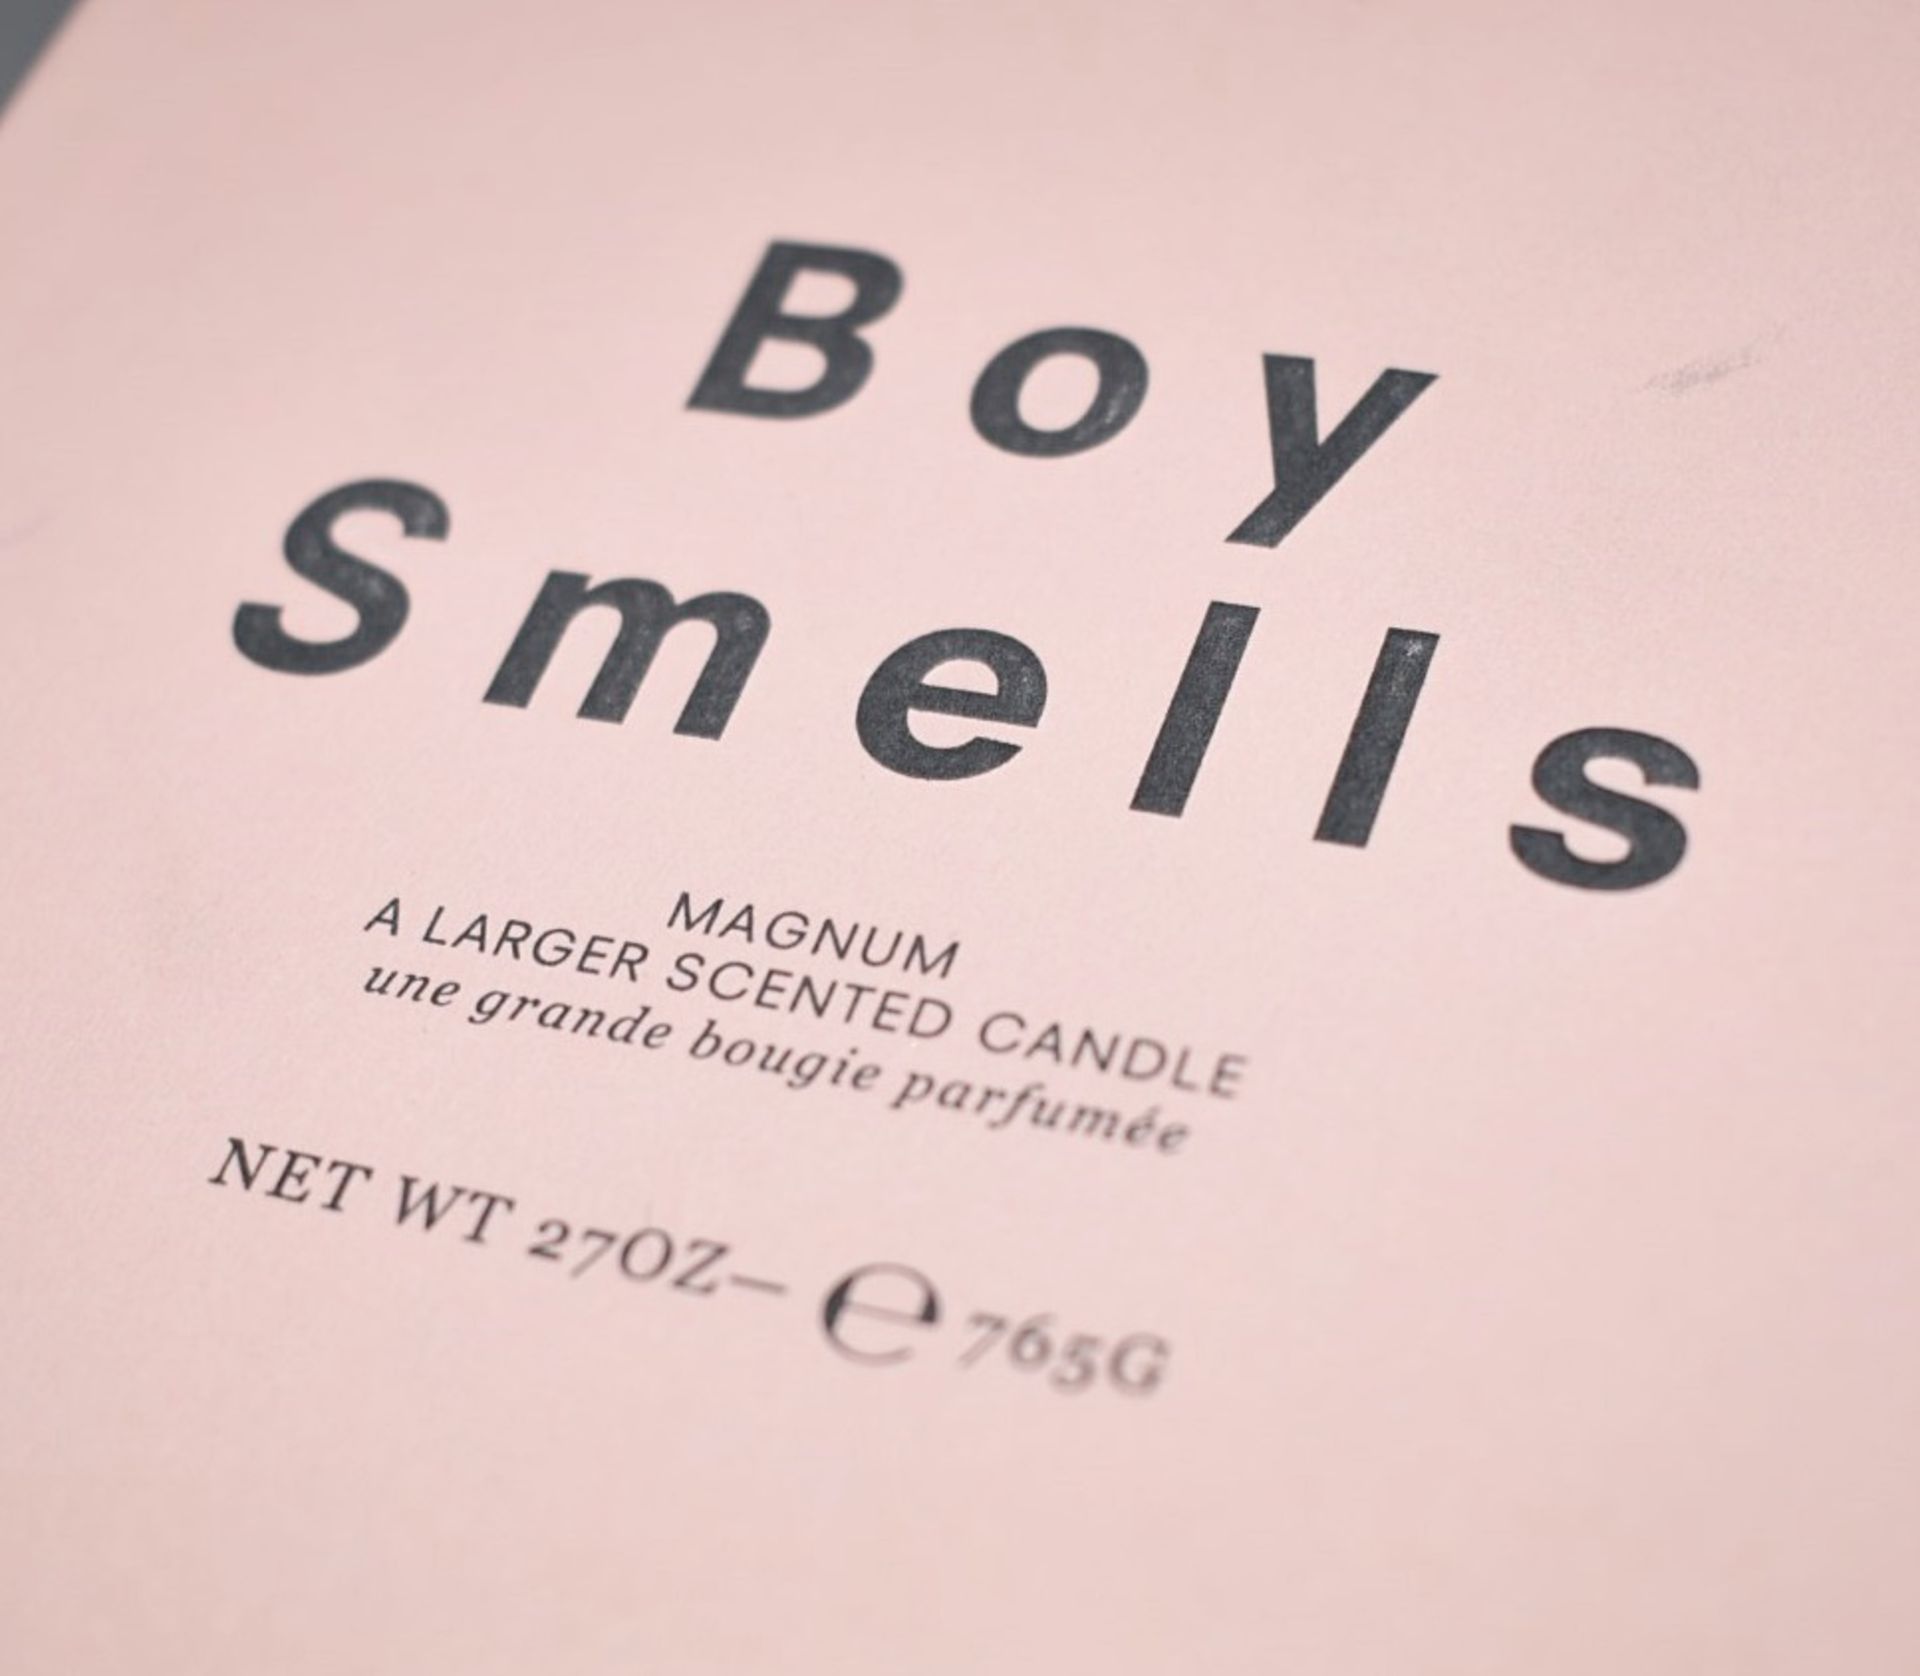 1 x BOY SMELLS 'Ash' Luxury Scented Candle (796g) - Original Price £120.00 - Unused Boxed Stock - Image 4 of 9